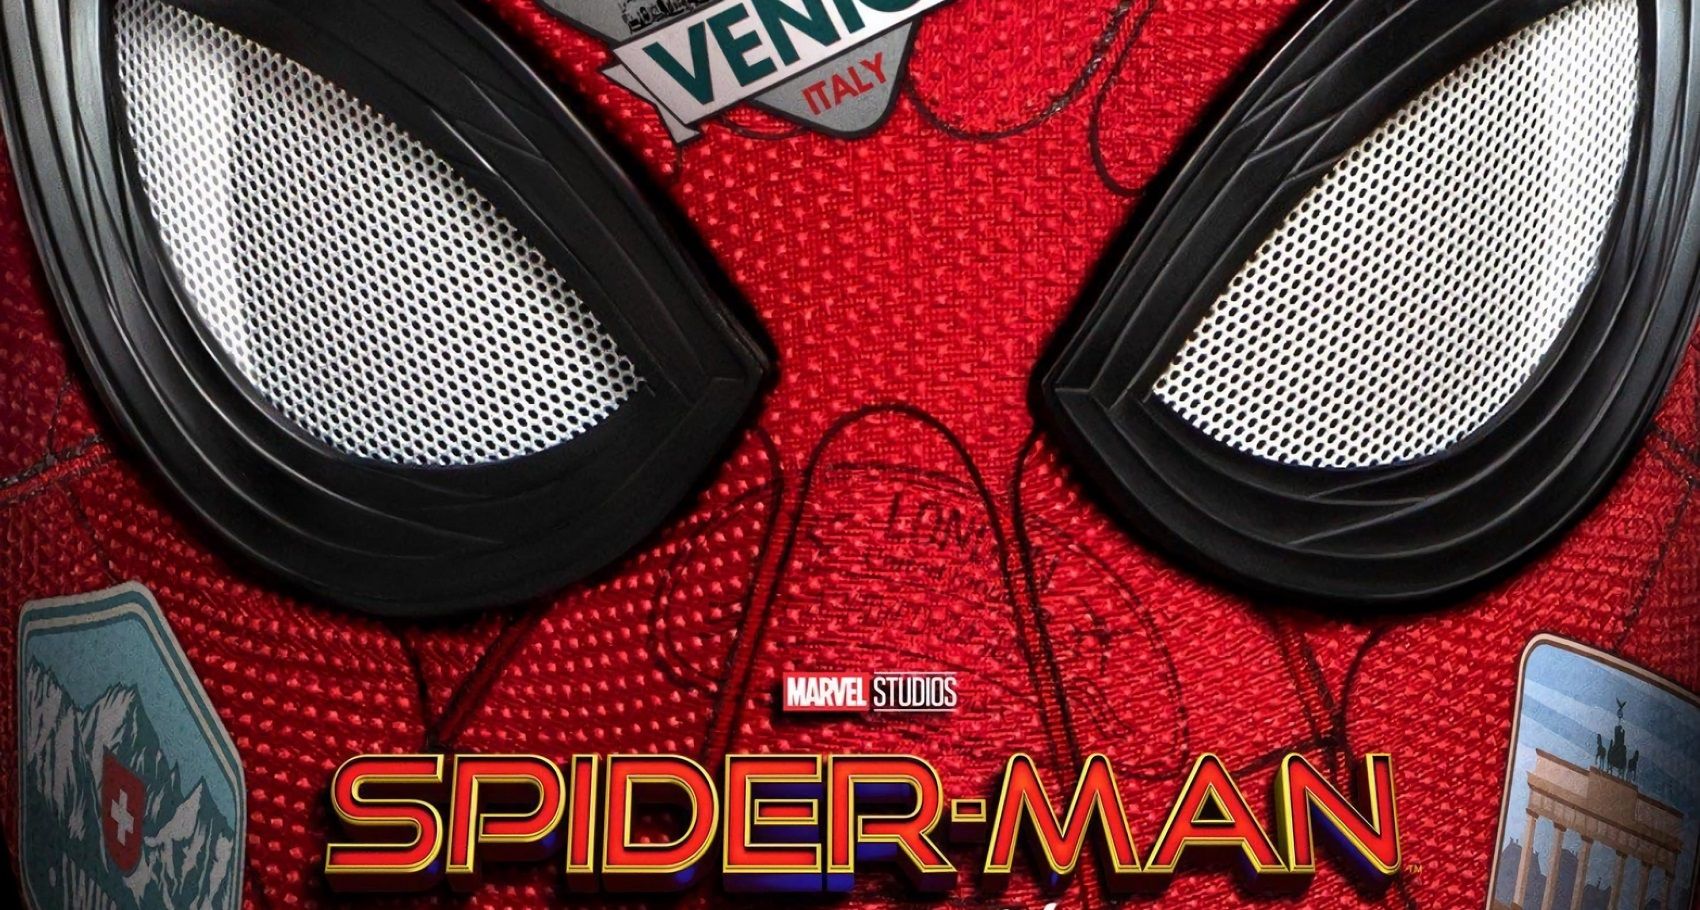 Spider-Man Far From Home poster spider-man's hoods